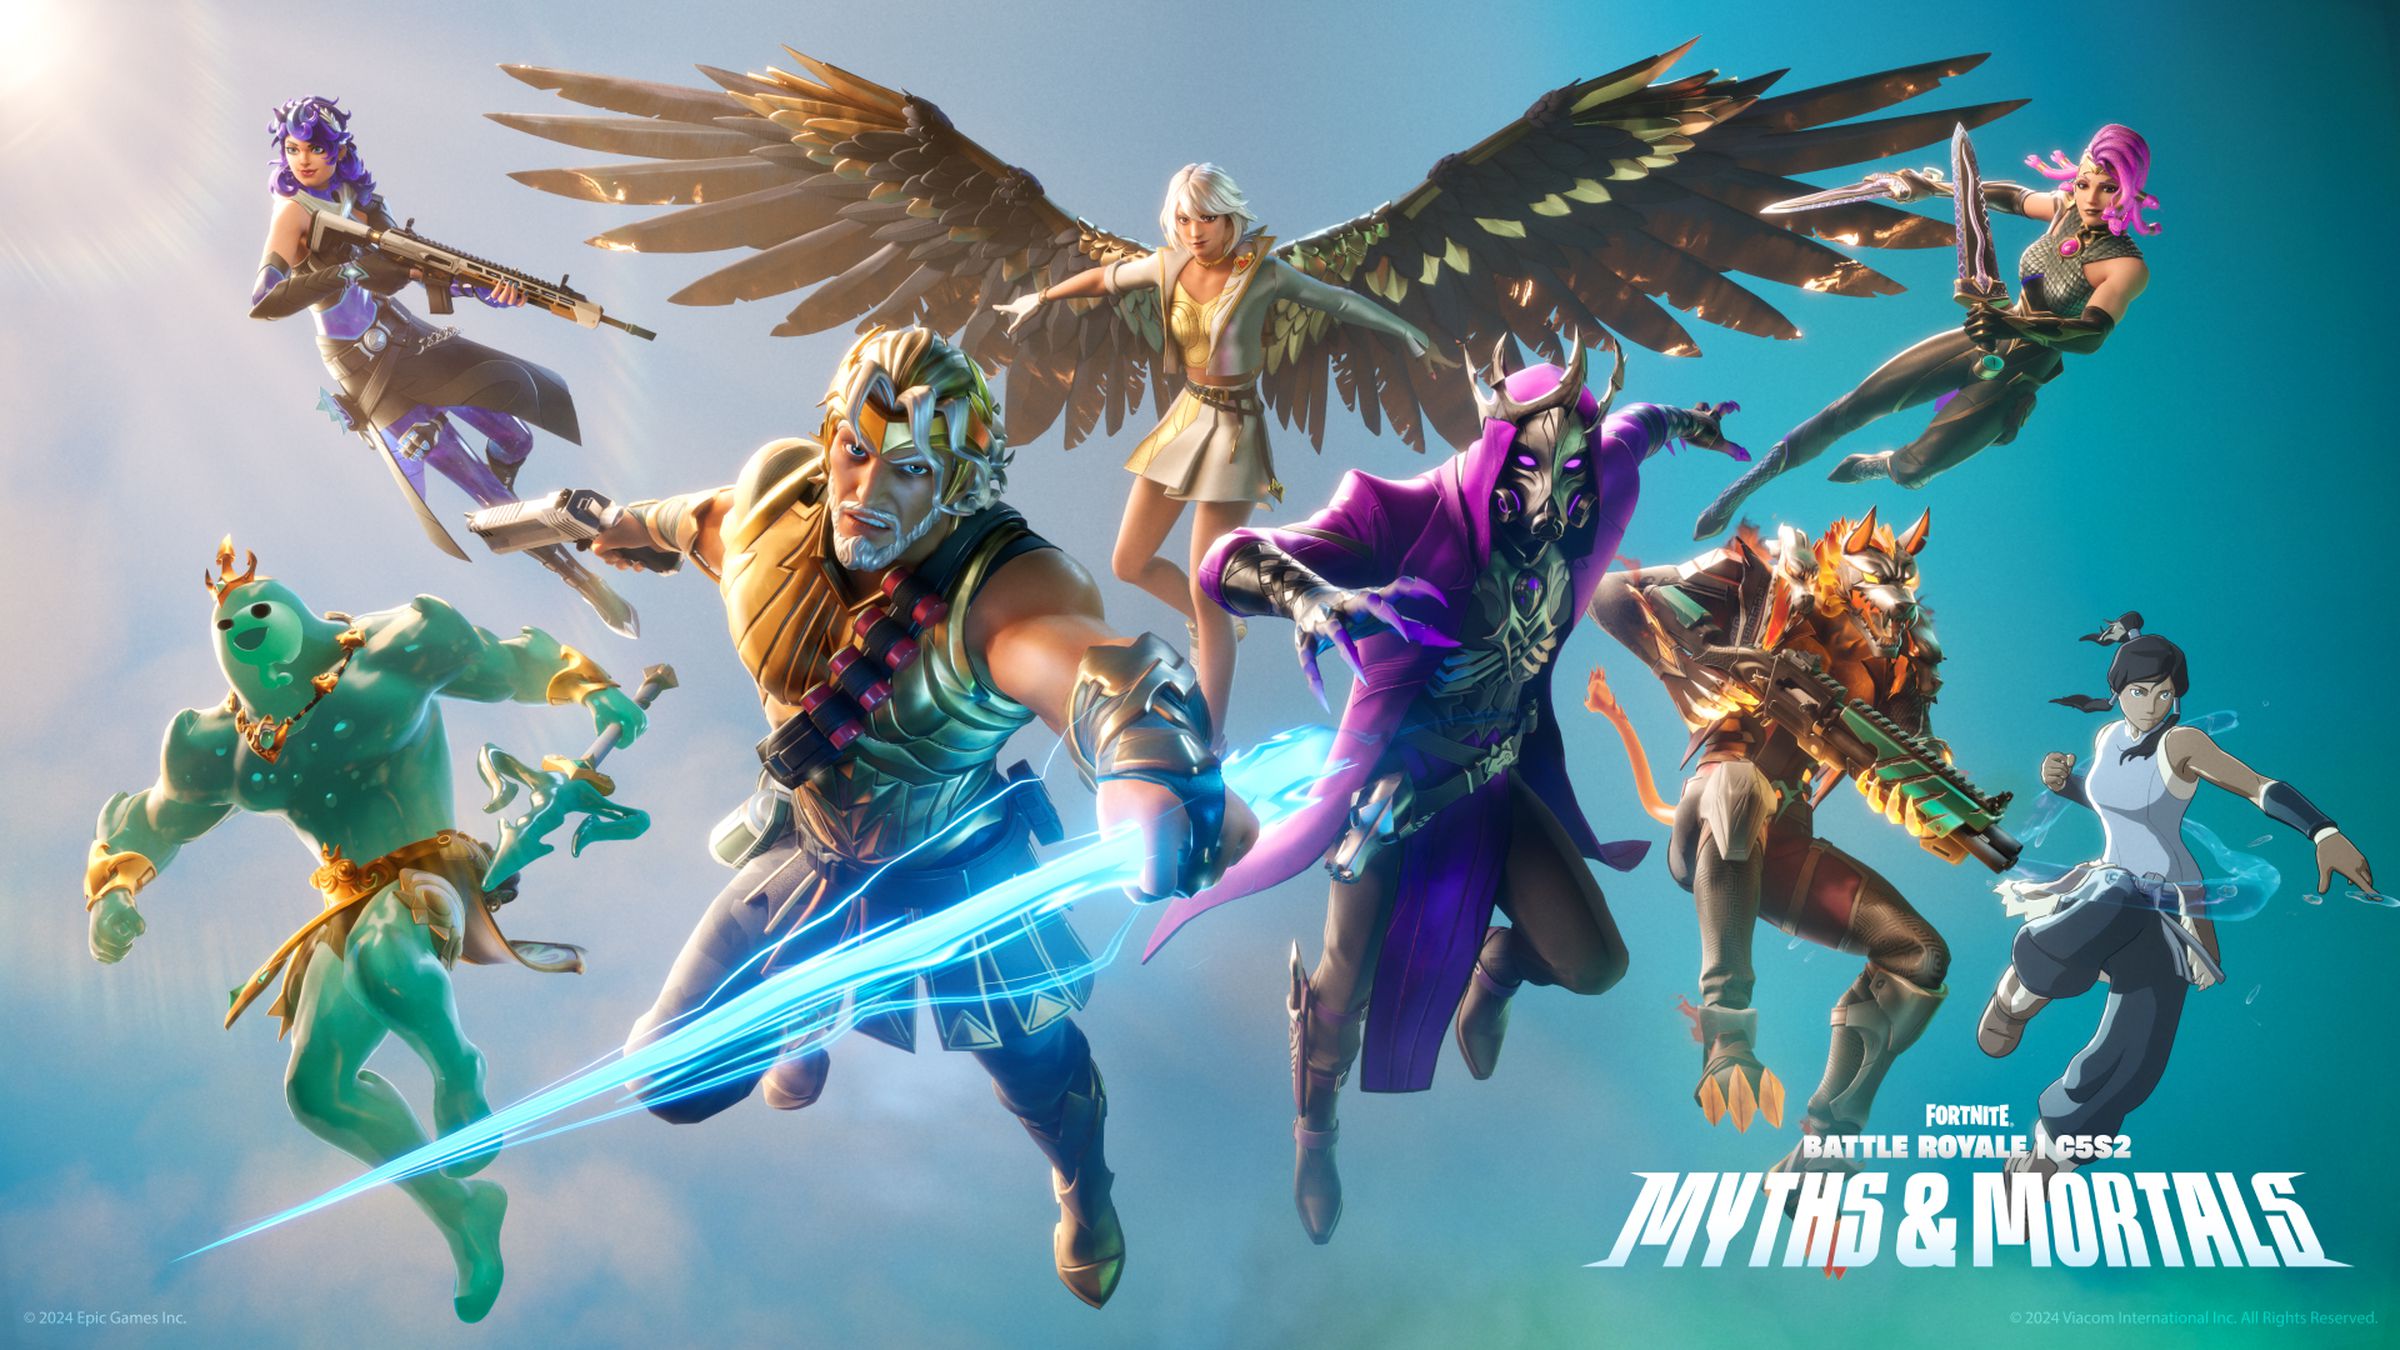 The new cast of characters in the Fortnite season Myths & Mortals.